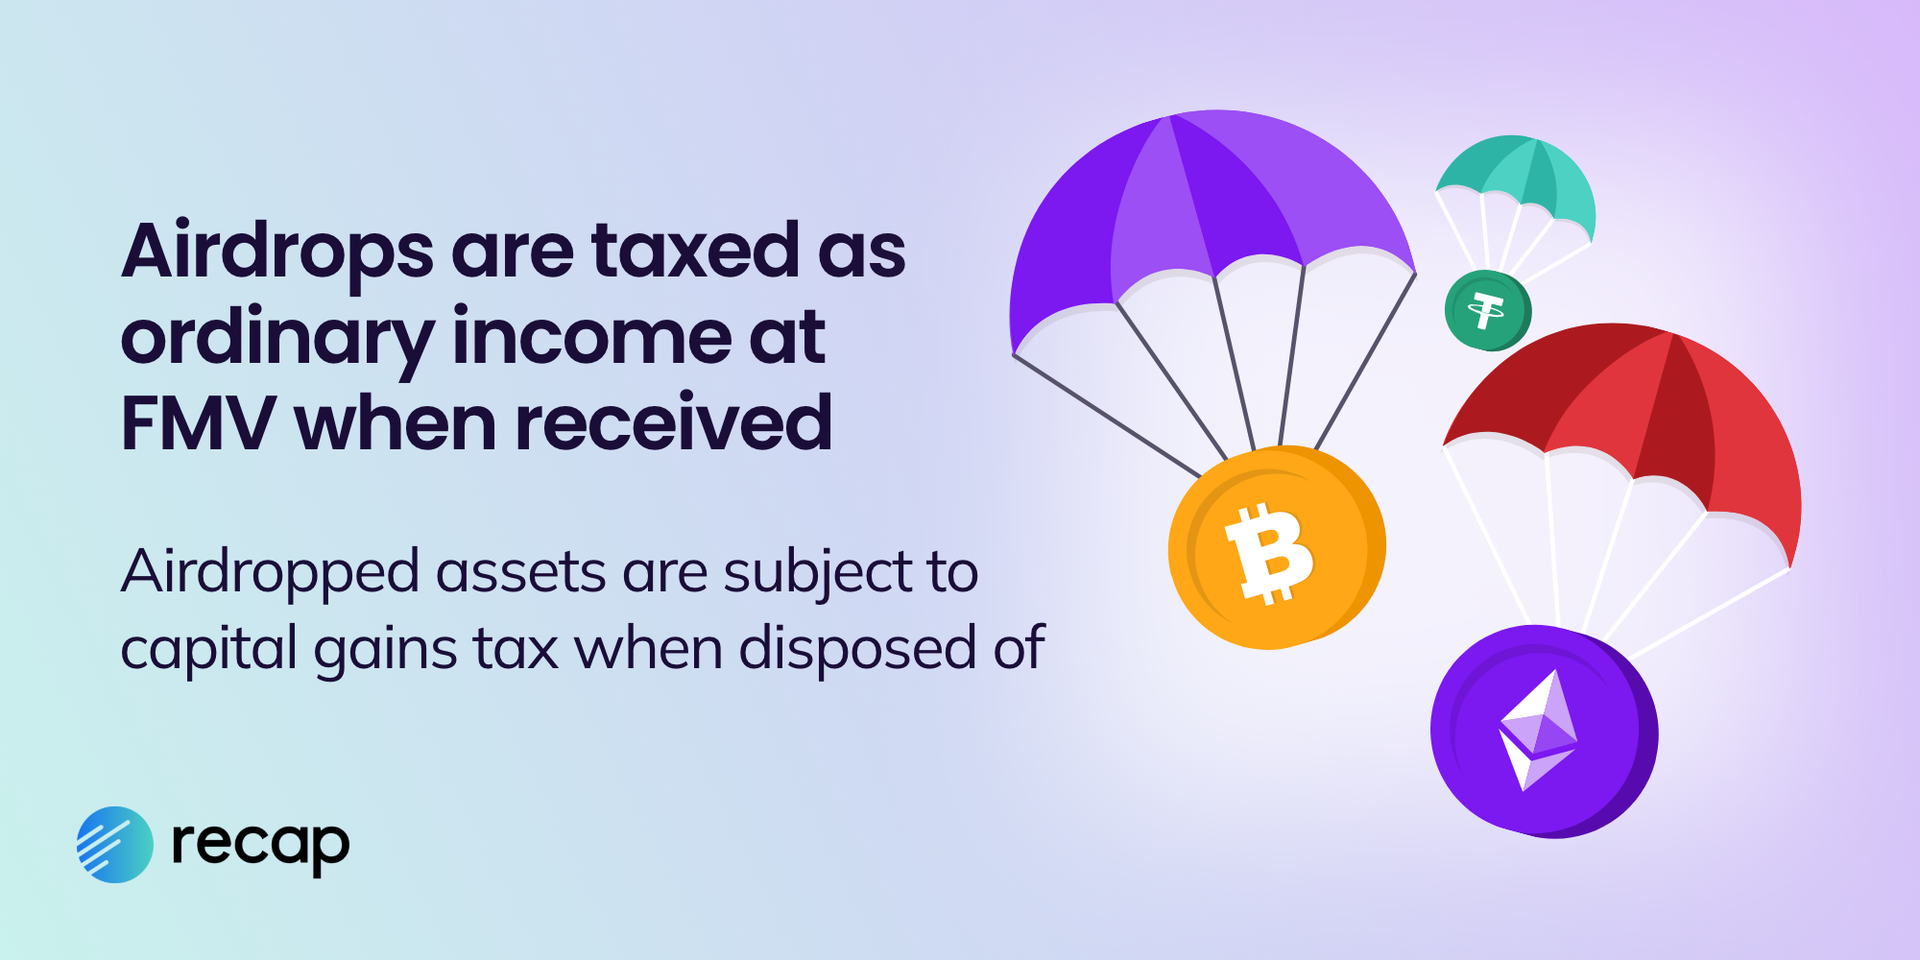 Illustration showing that airdrops are taxed as ordinary income on receipt 